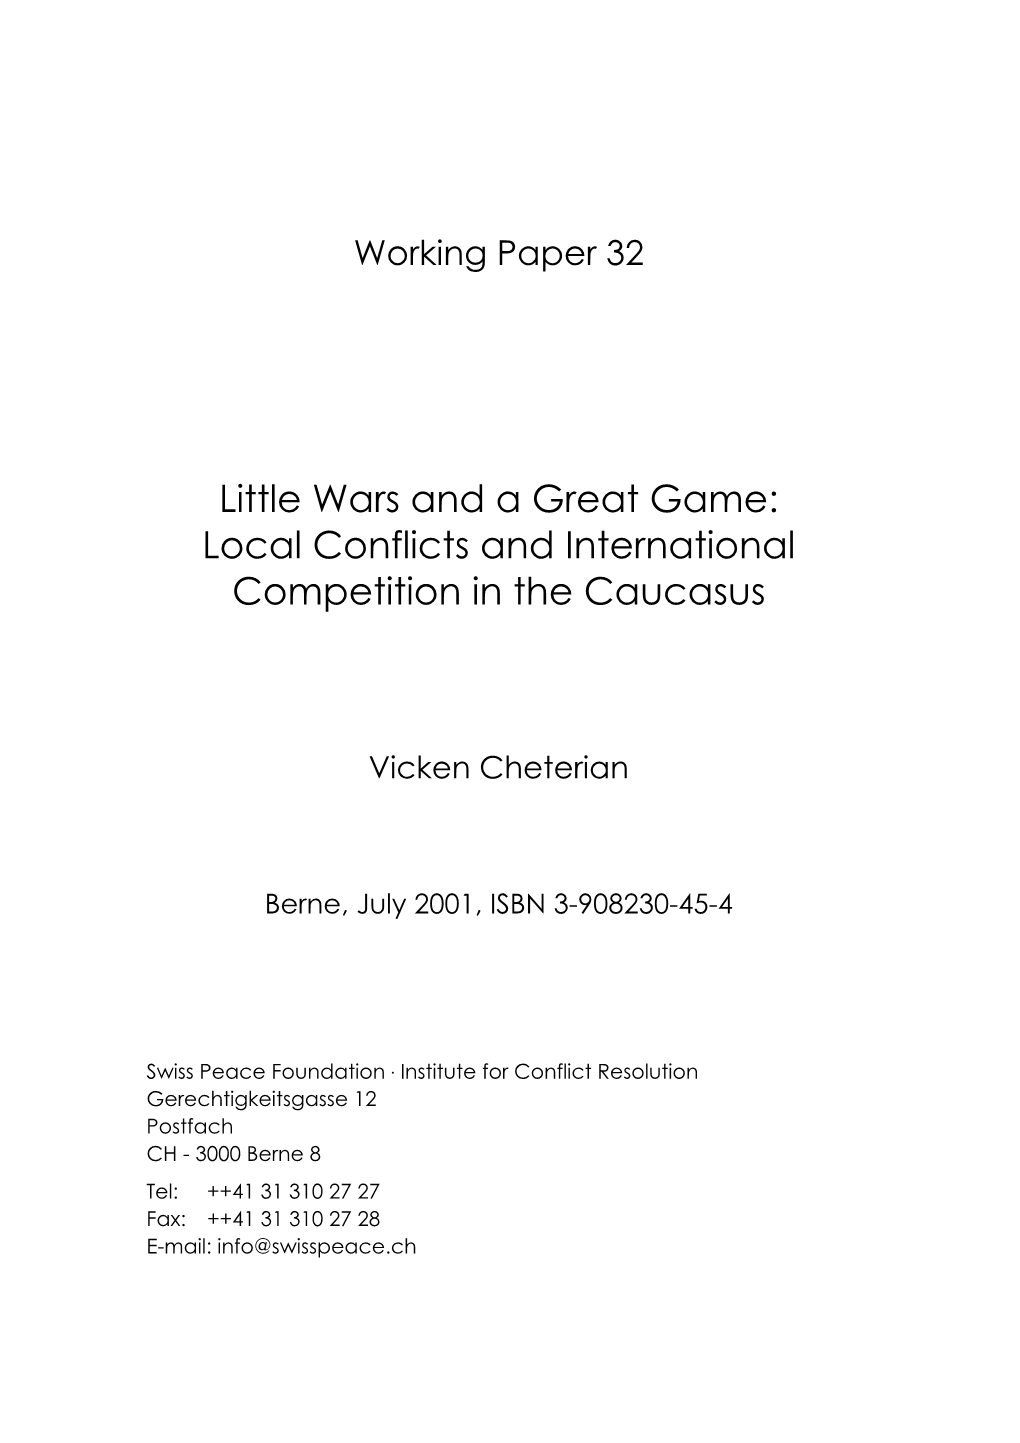 Local Conflicts and International Competition in the Caucasus